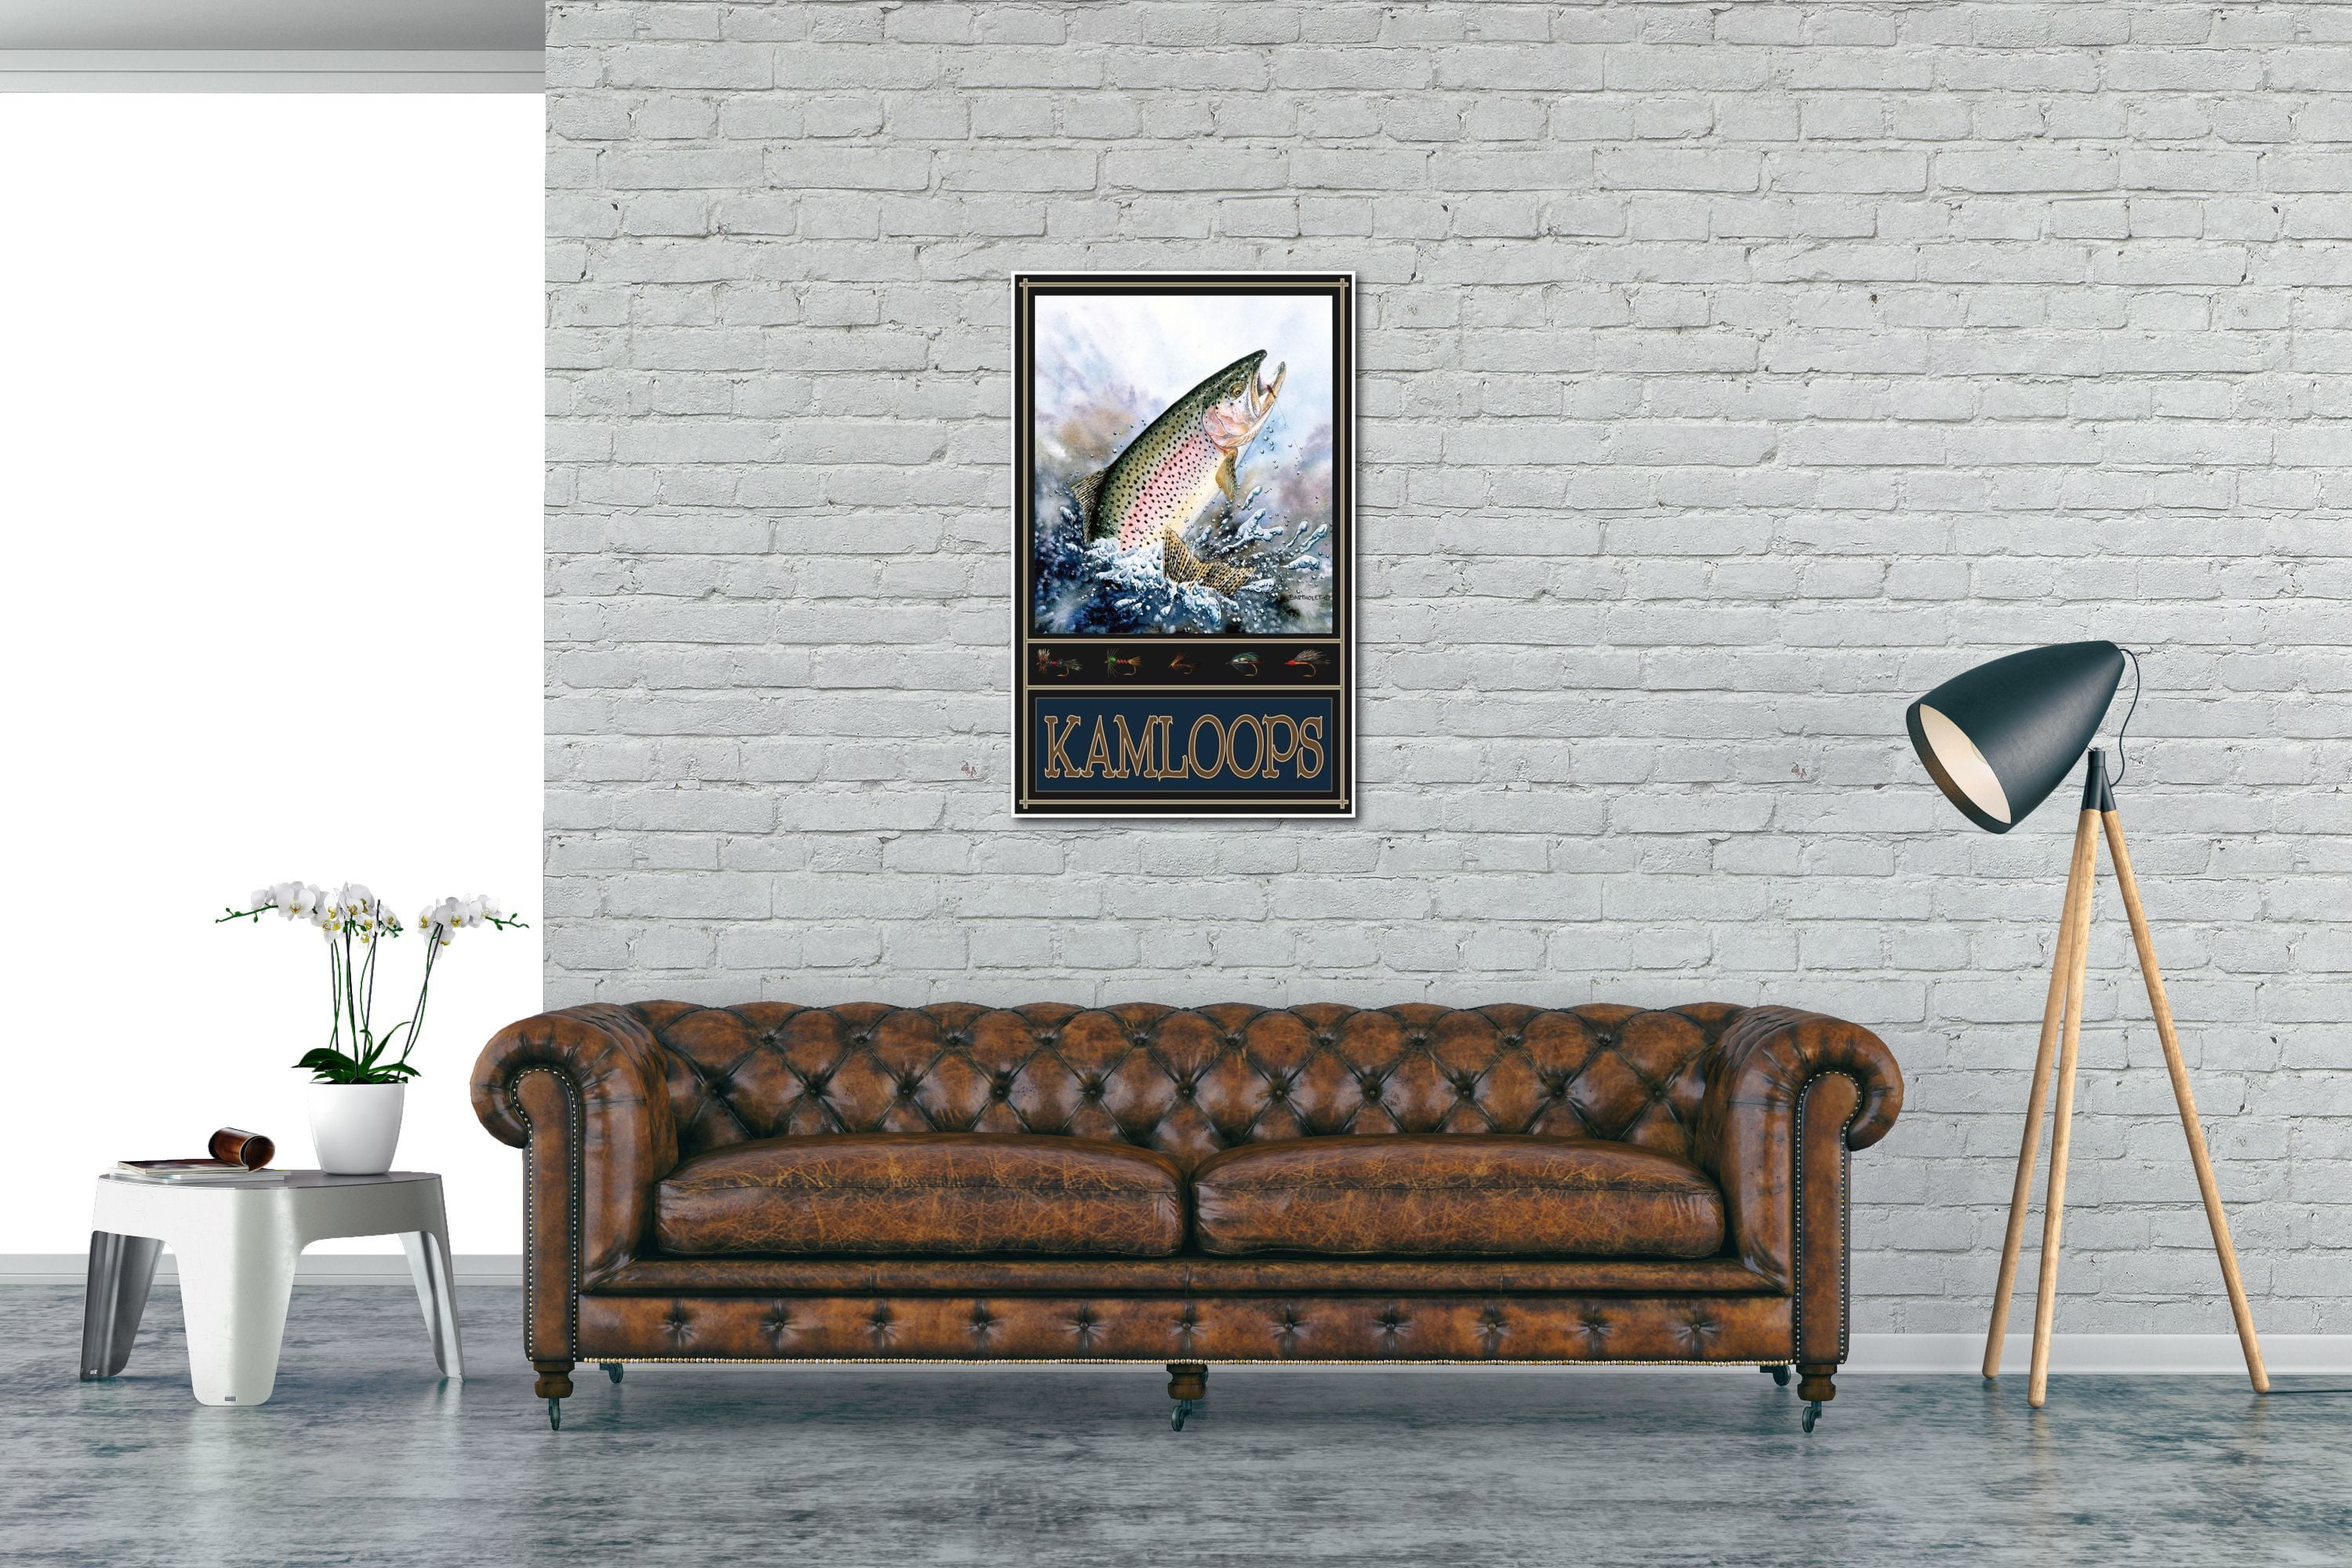 Kamloops Canada Rainbow Trout Giclee Art Print Poster from Original Watercolor by Artist Dave Bartholet